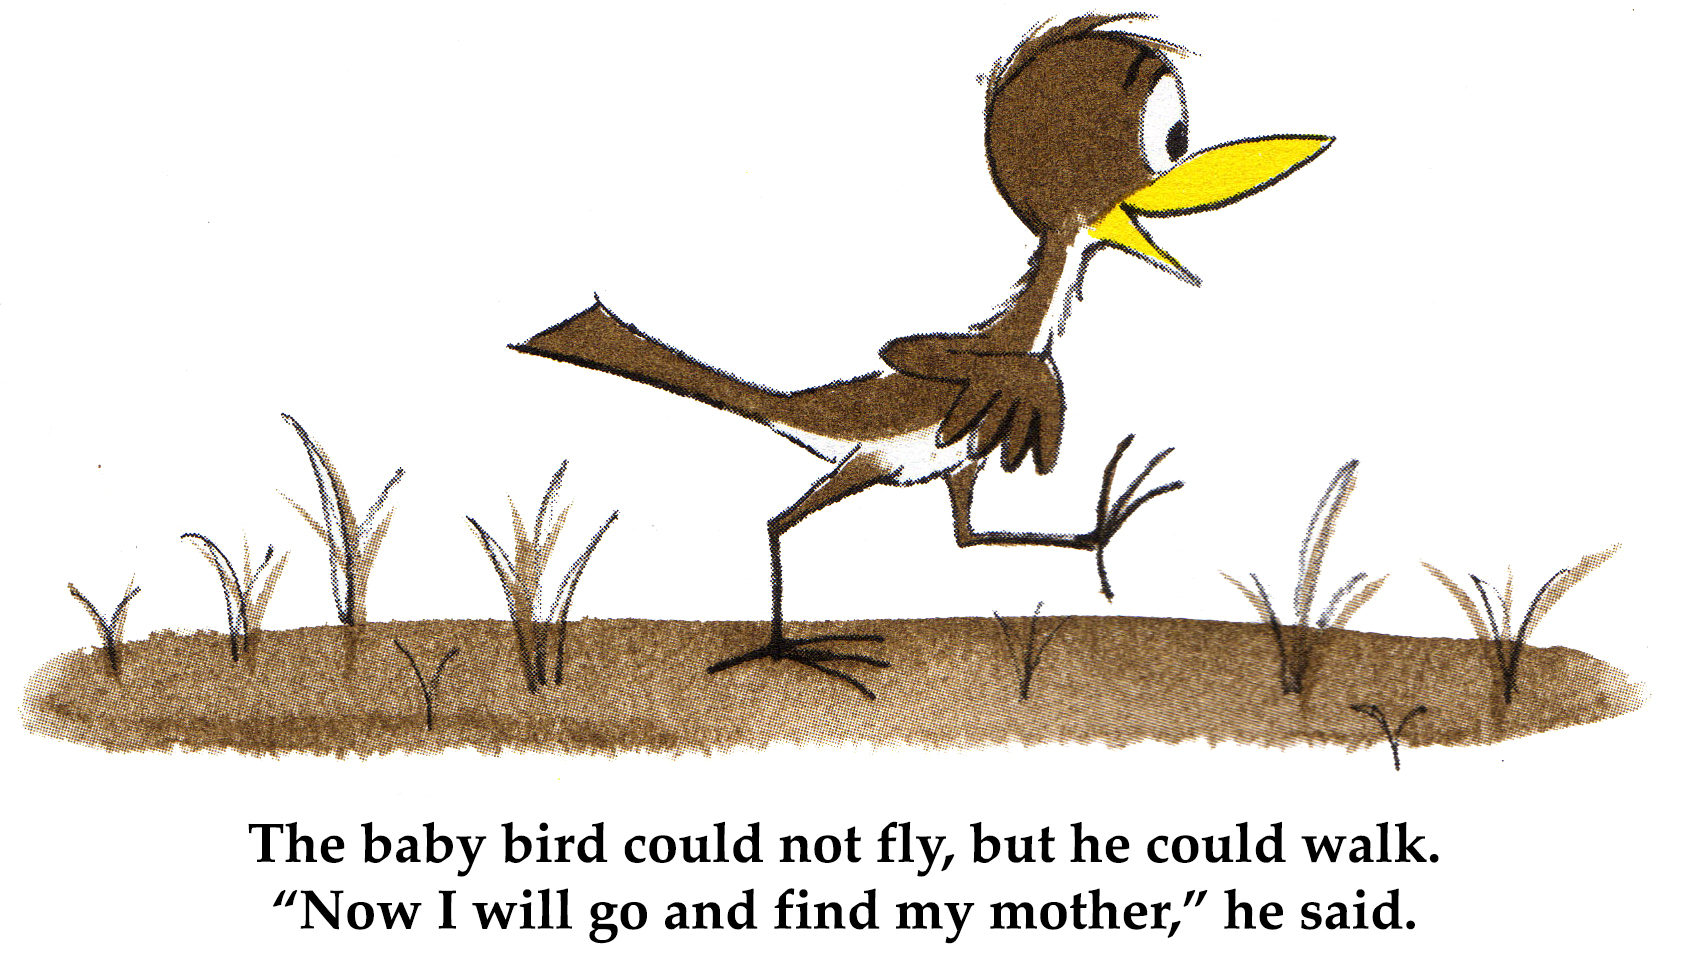 The baby bird could not fly, but he could walk.